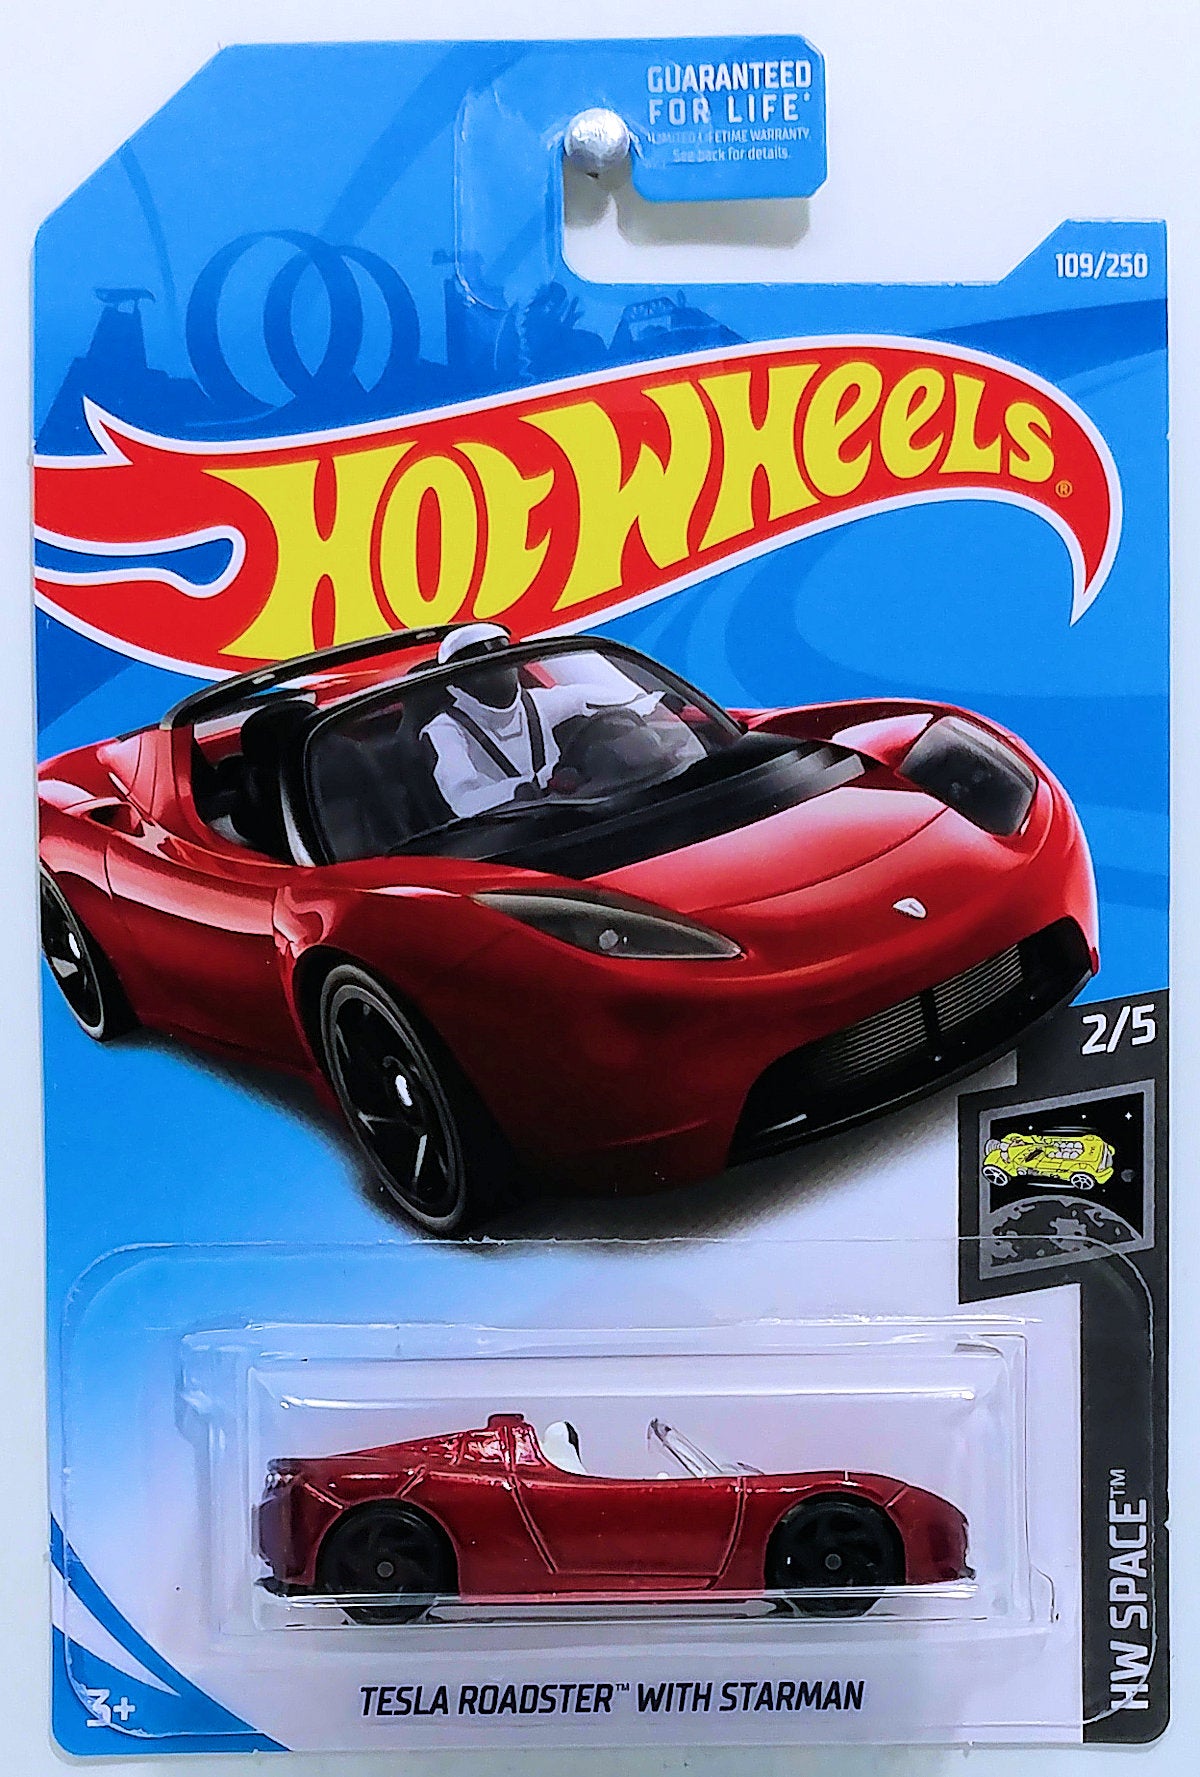 Hot Wheels 2019 - Collector # 109/250 - HW Space 2/5 - Tesla Roadster with Starman - Red